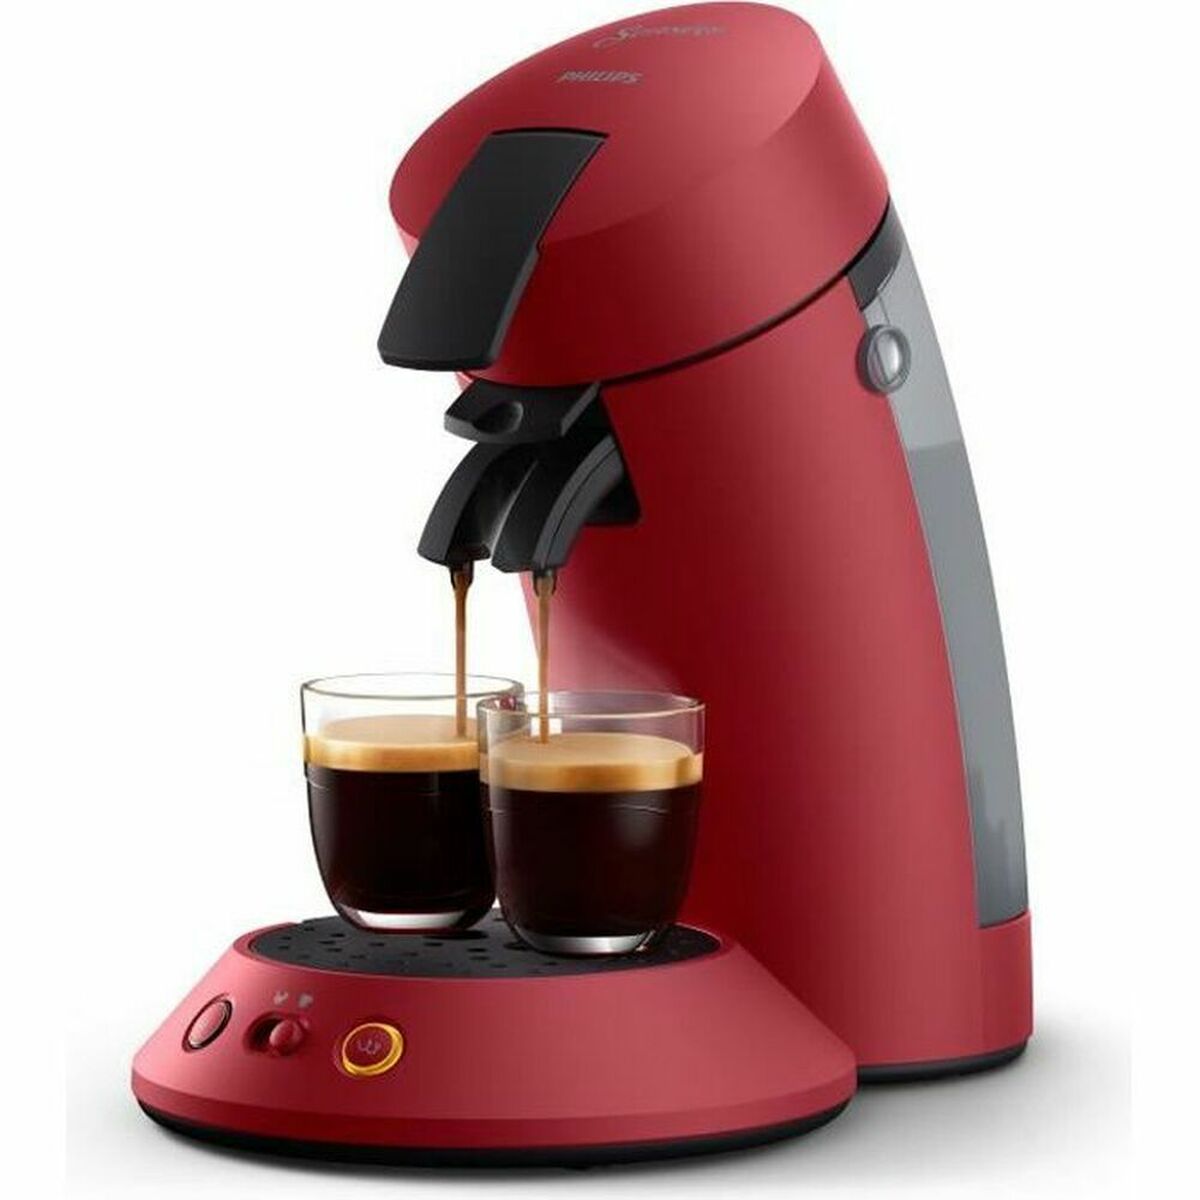 Cafetera eléctrica Philips CSA210/91 Red 700 ml